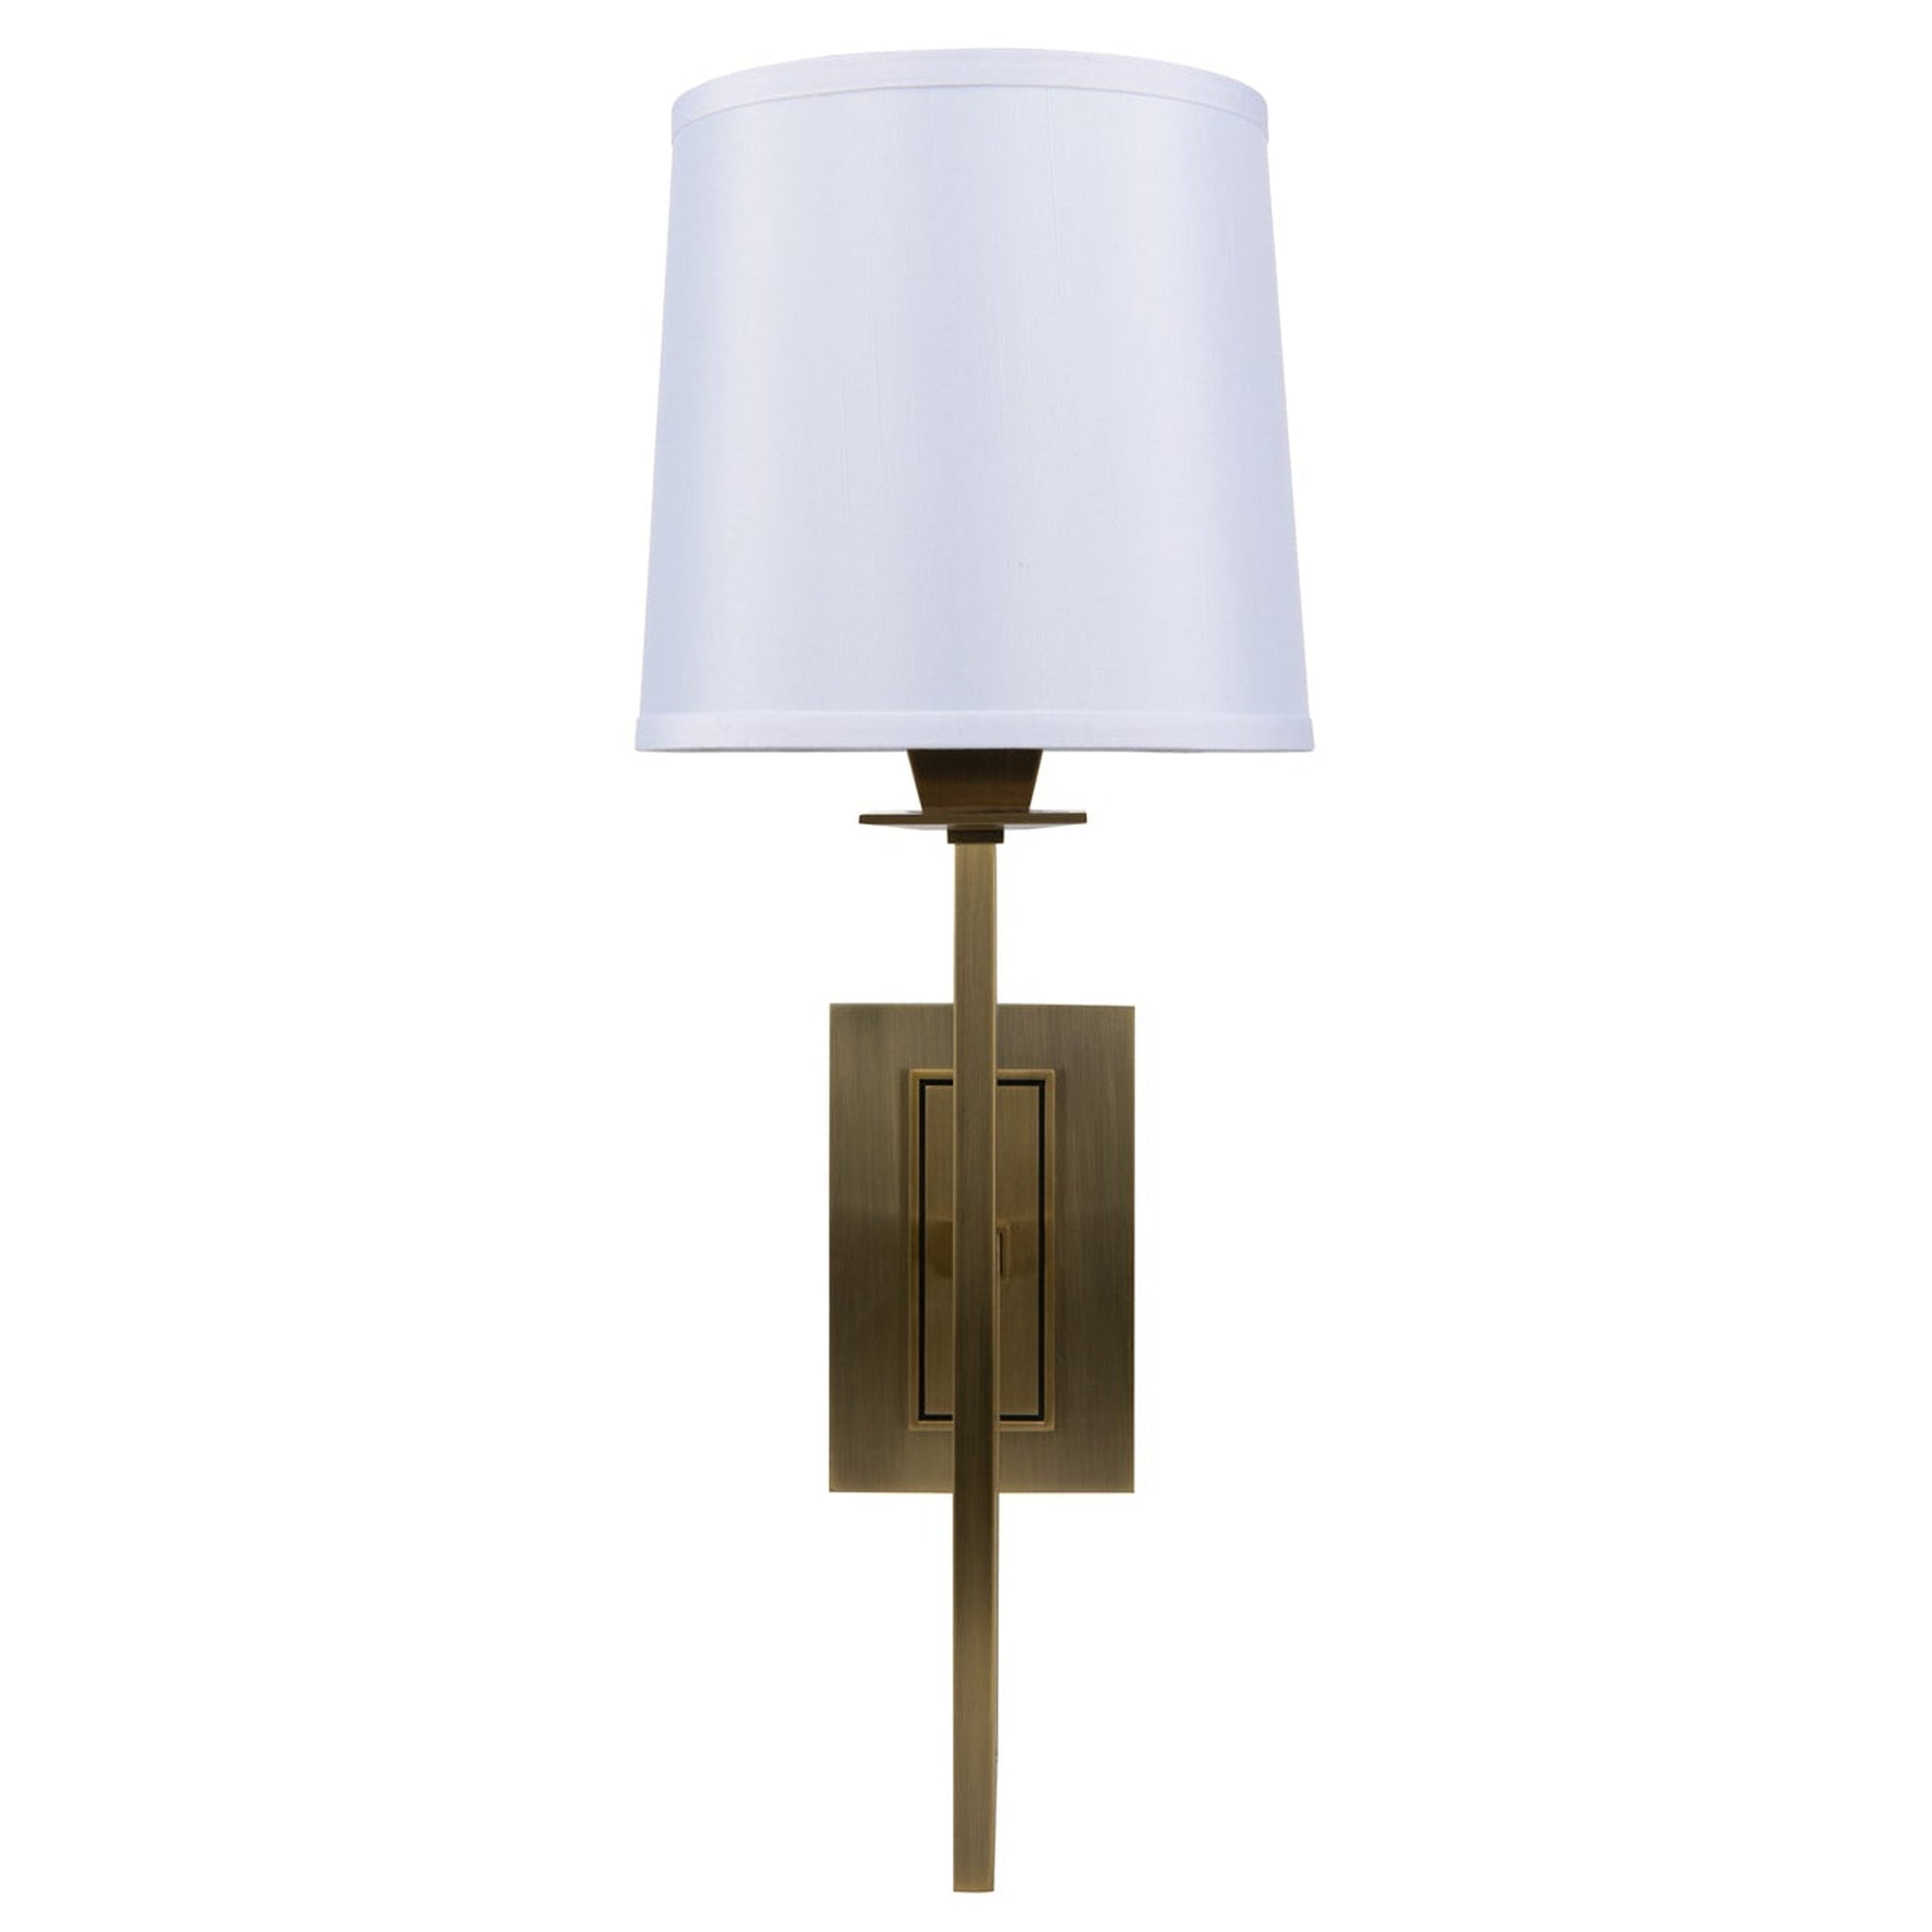 Norwell Lighting Maya 6" x 4" 1-Light Sconce Aged Brass Indoor Wall Light With Fabric Diffuser